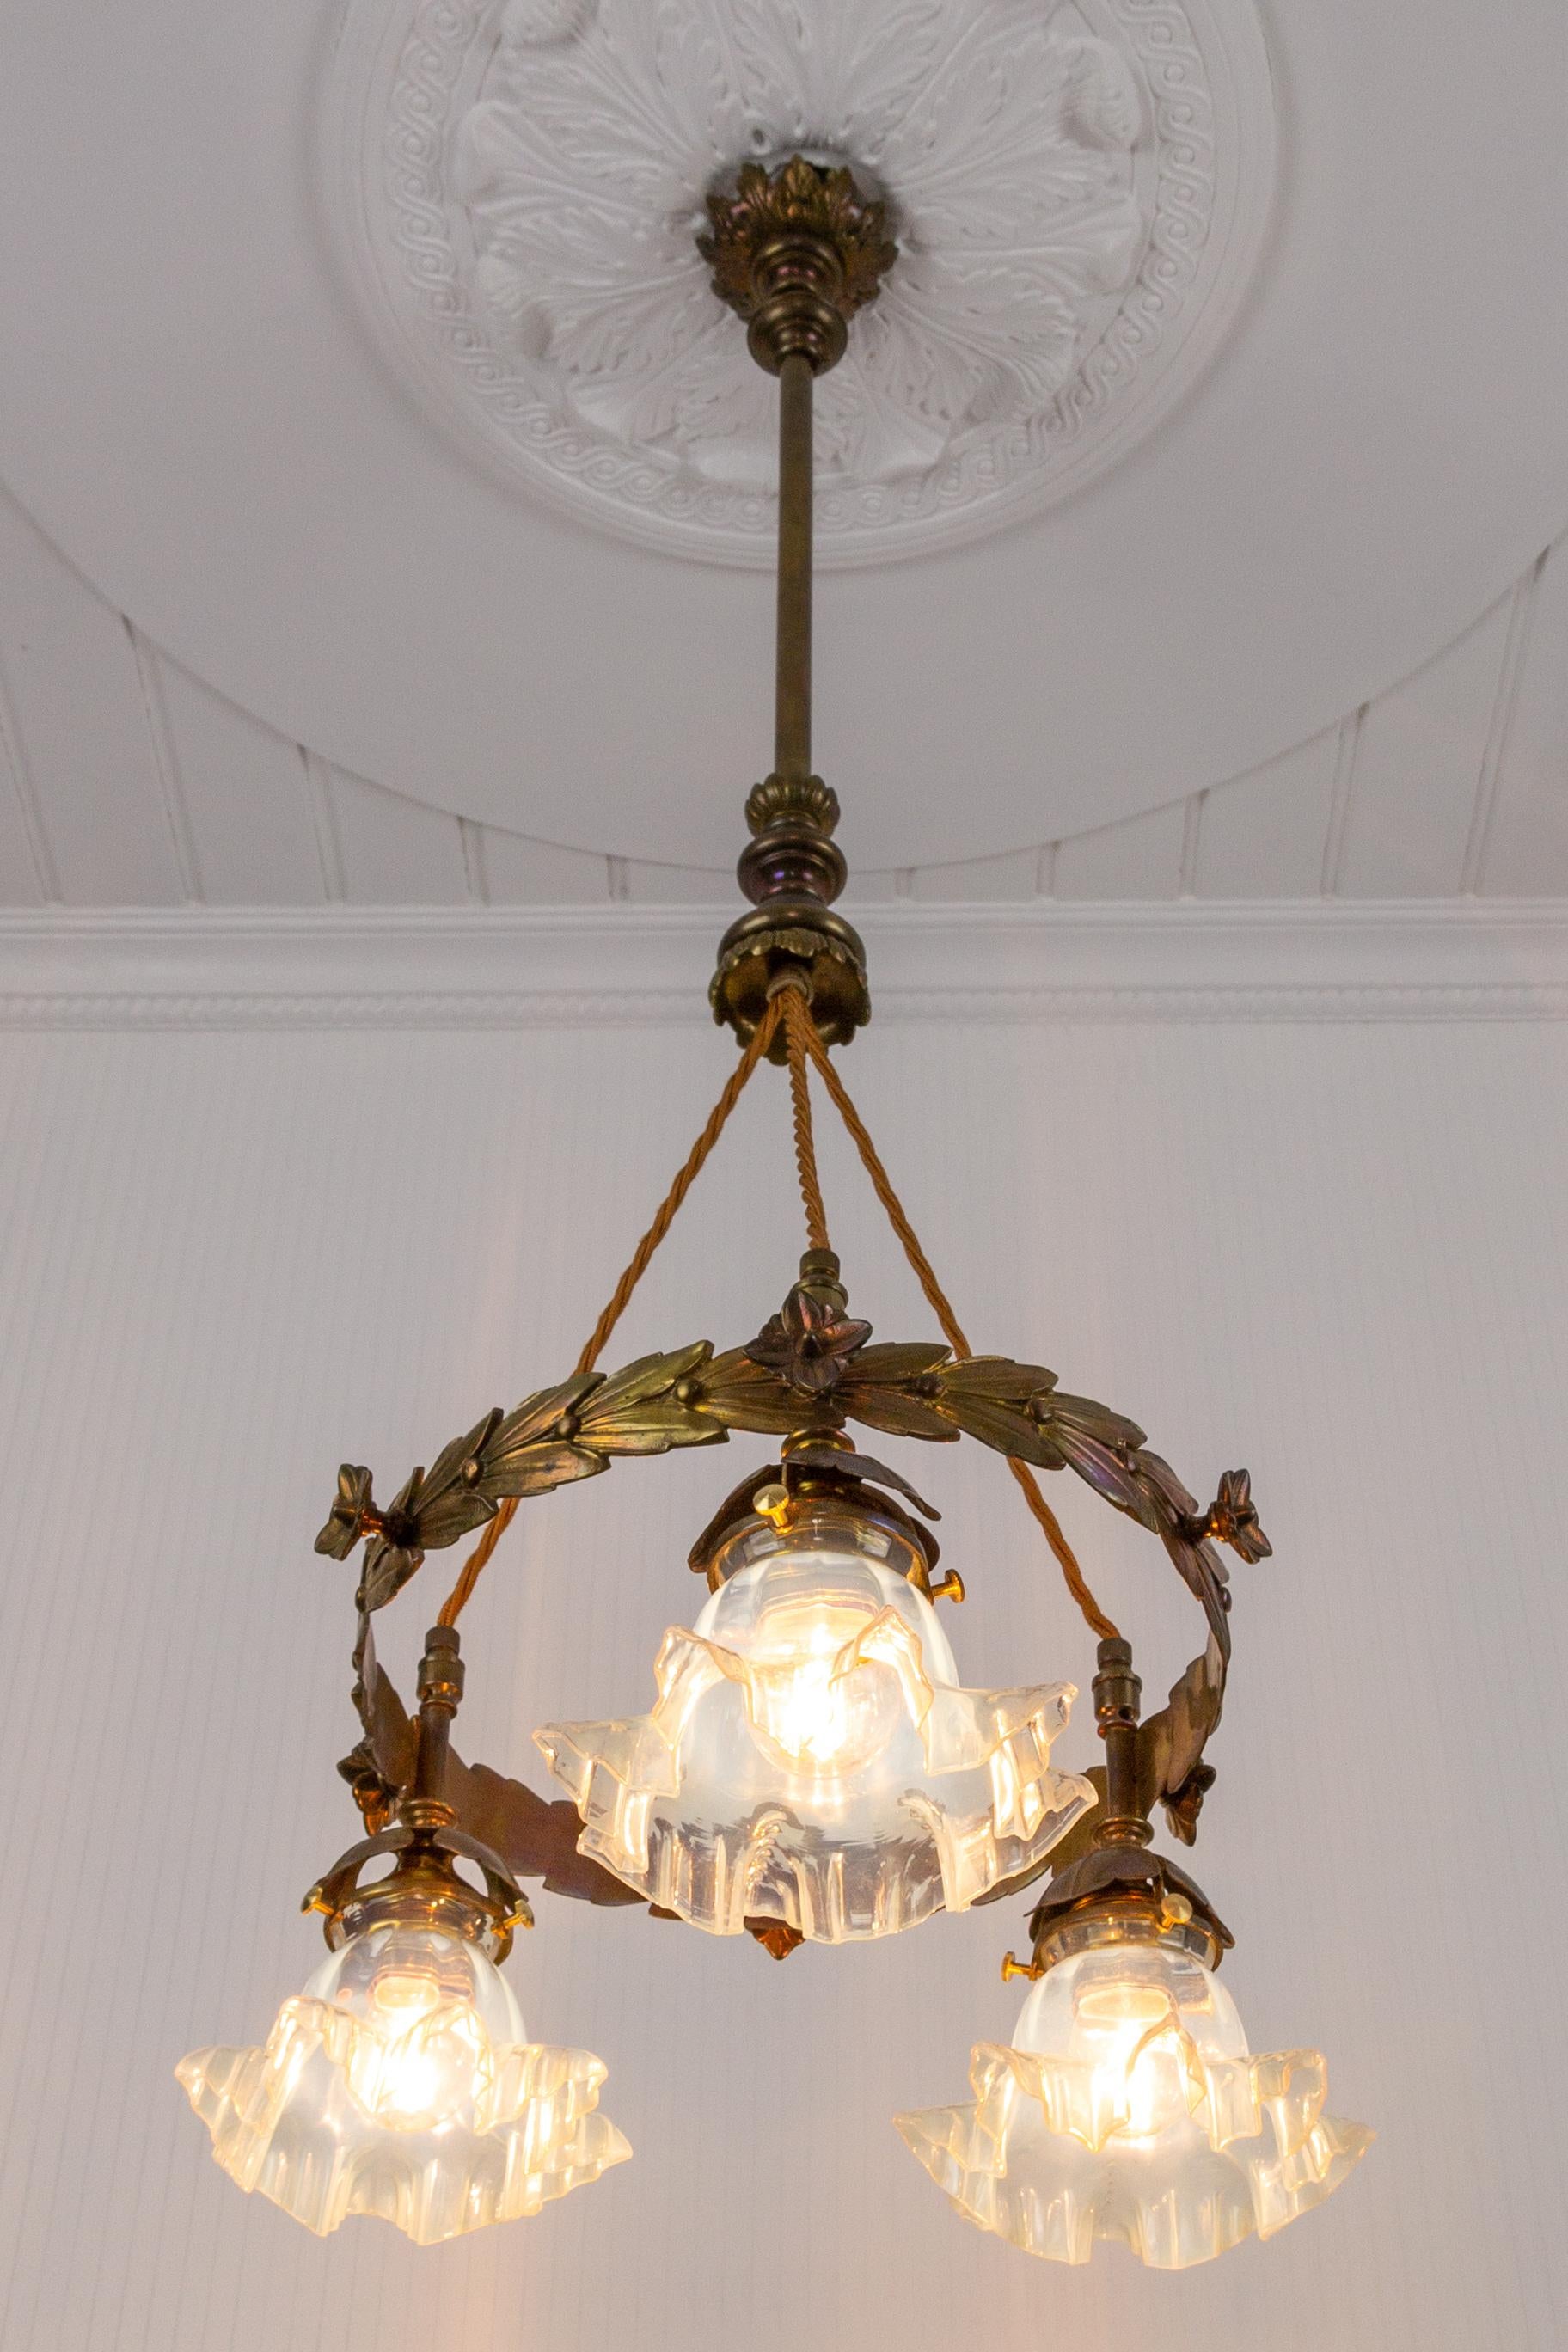 Beautiful Art Nouveau style brass chandelier from the 1920s. The pendant chandelier features brass parts with floral and acanthus leaves decorations and three floral-shaped lampshades made of opalescent translucent glass. 
Three sockets for E27